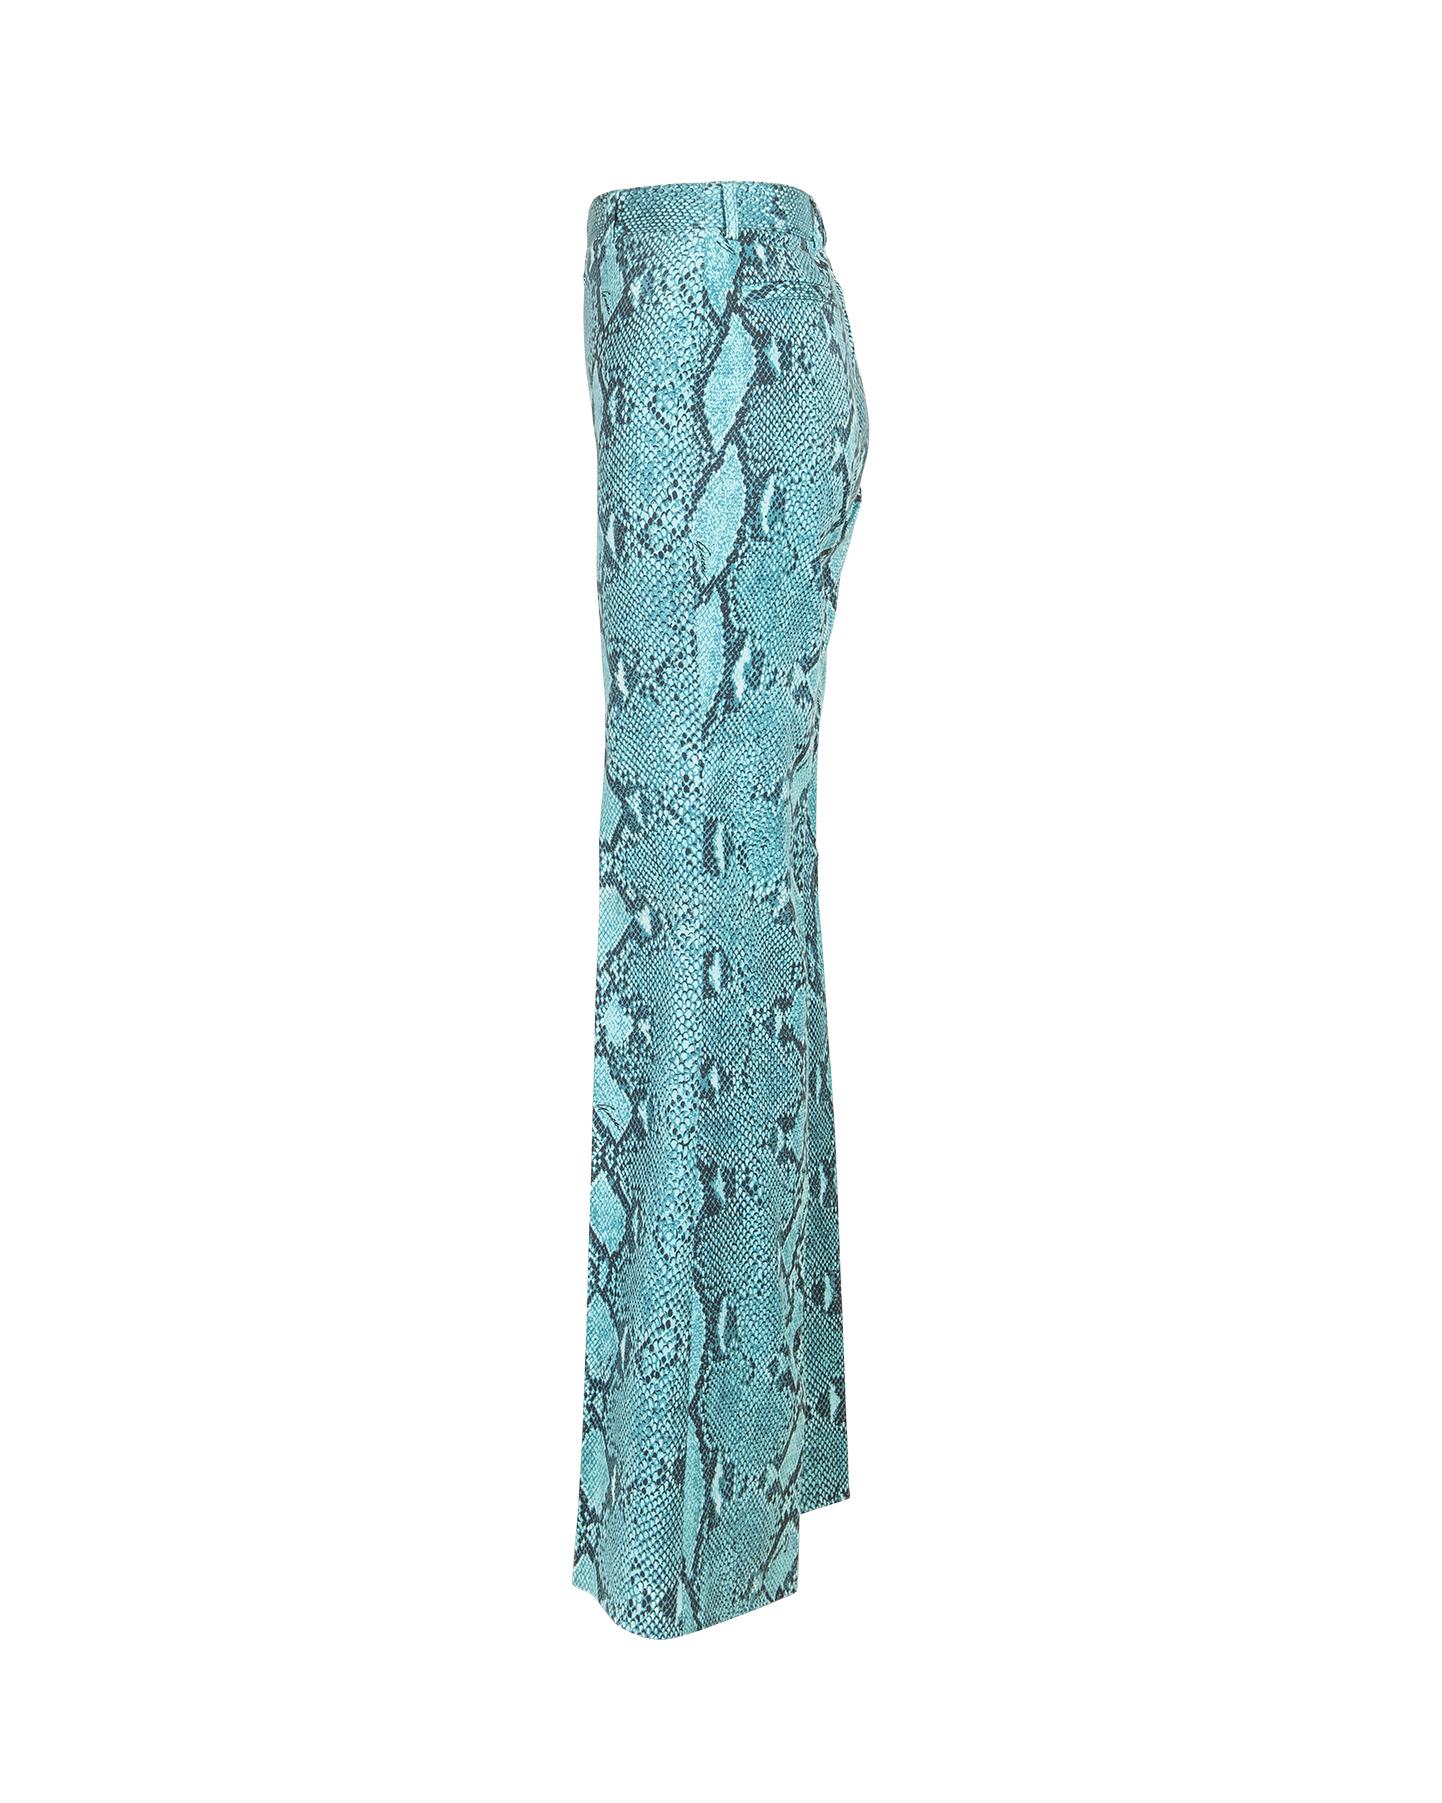 S/S 2000 Gucci by Tom Ford Turquoise Snakeskin Trousers In Excellent Condition In North Hollywood, CA